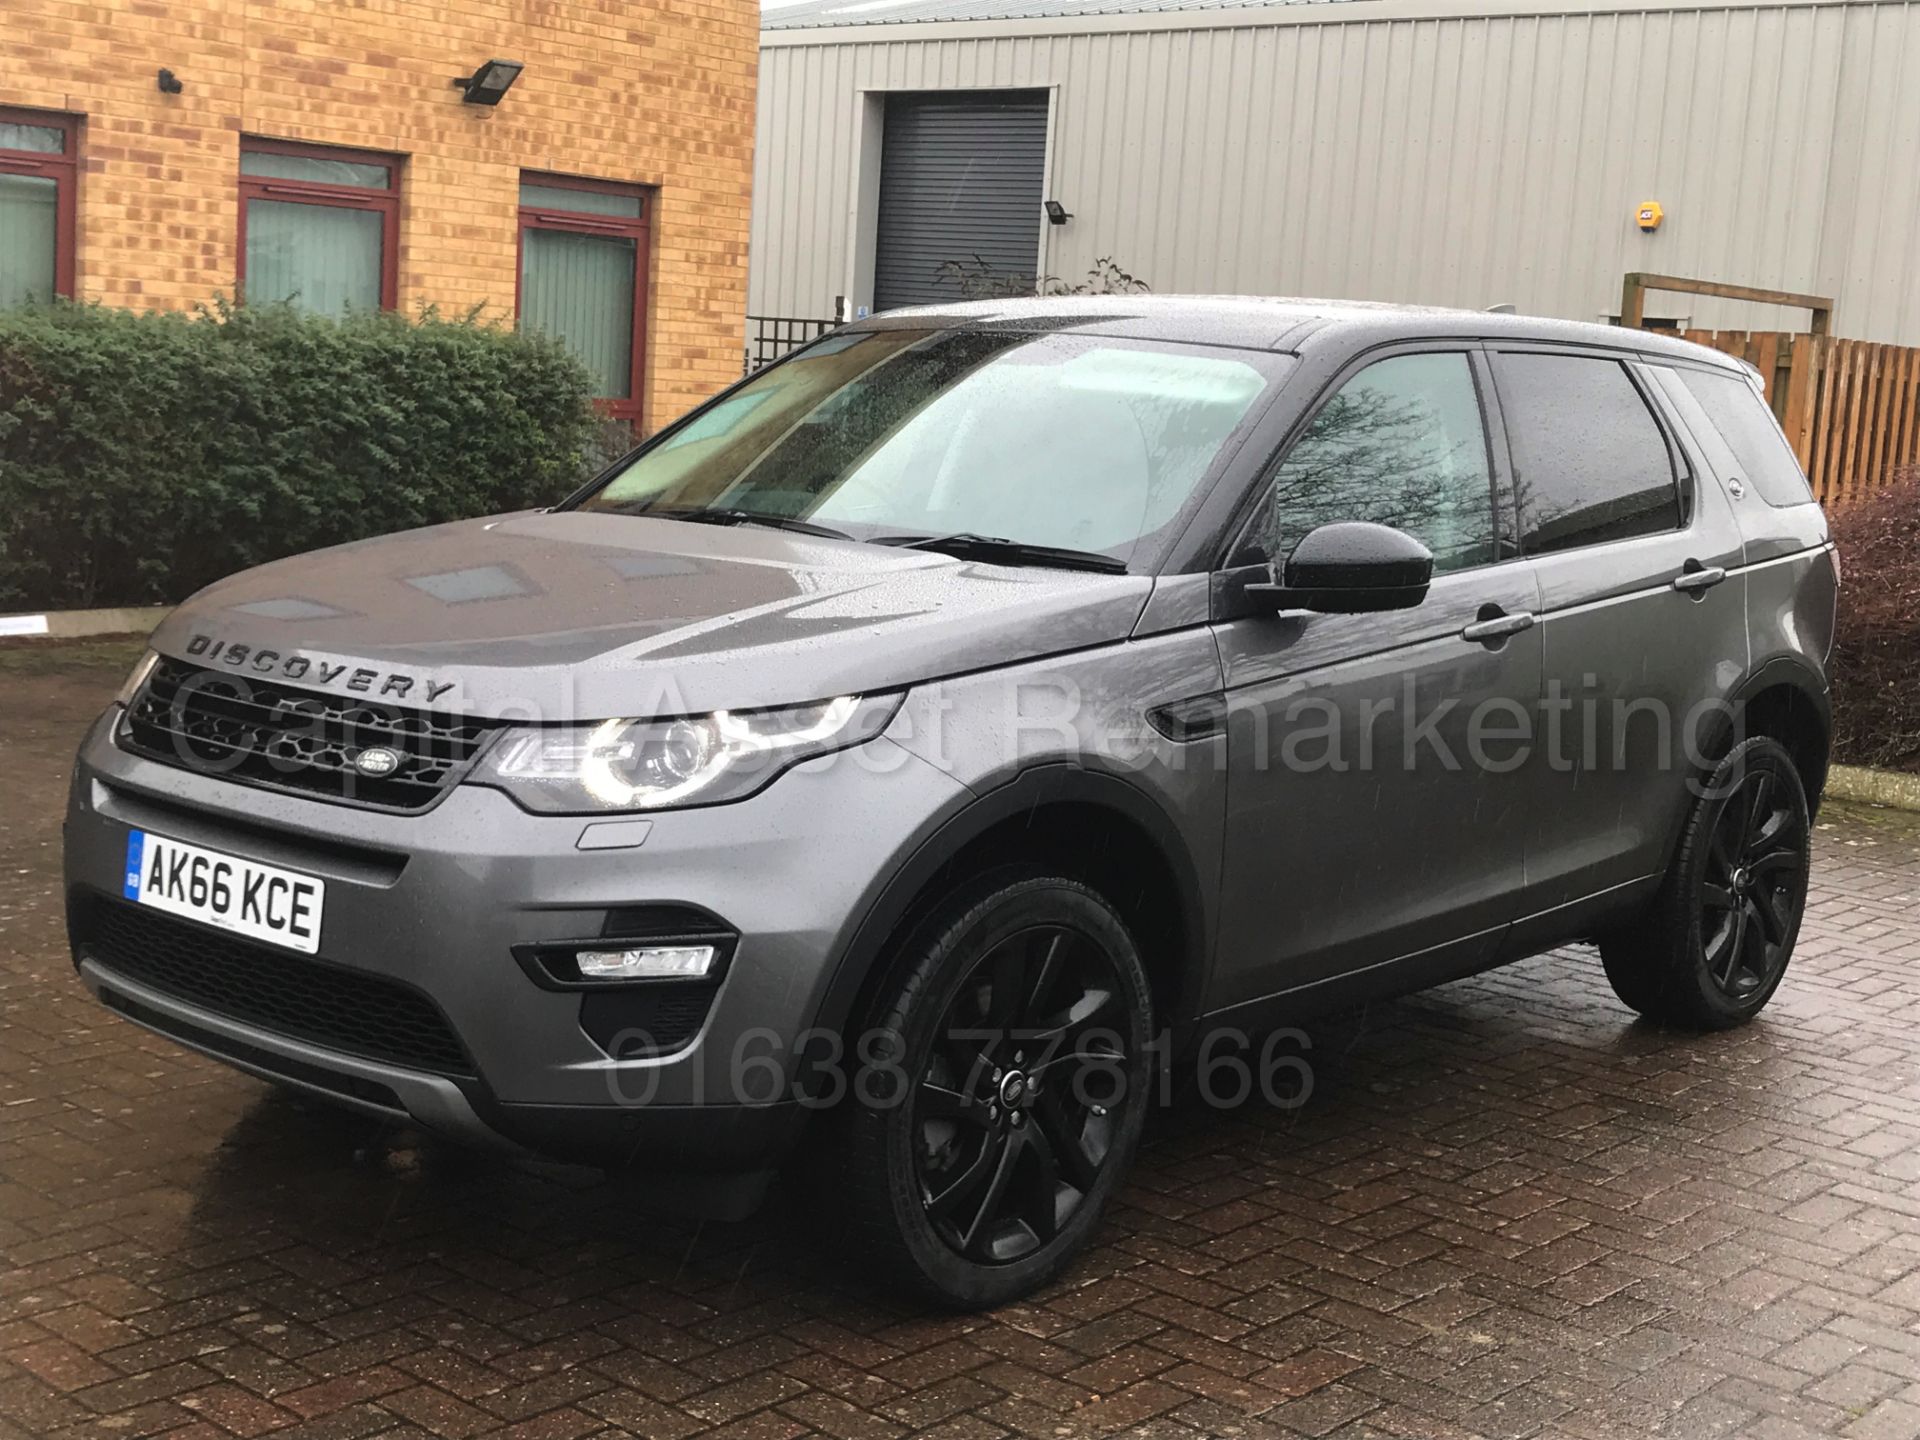 LAND ROVER DISCOVERY SPORT 'HSE - BLACK' (2017 MODEL) '2.0 TD4 - AUTO - 7 SEATER' *MASSIVE SPEC*